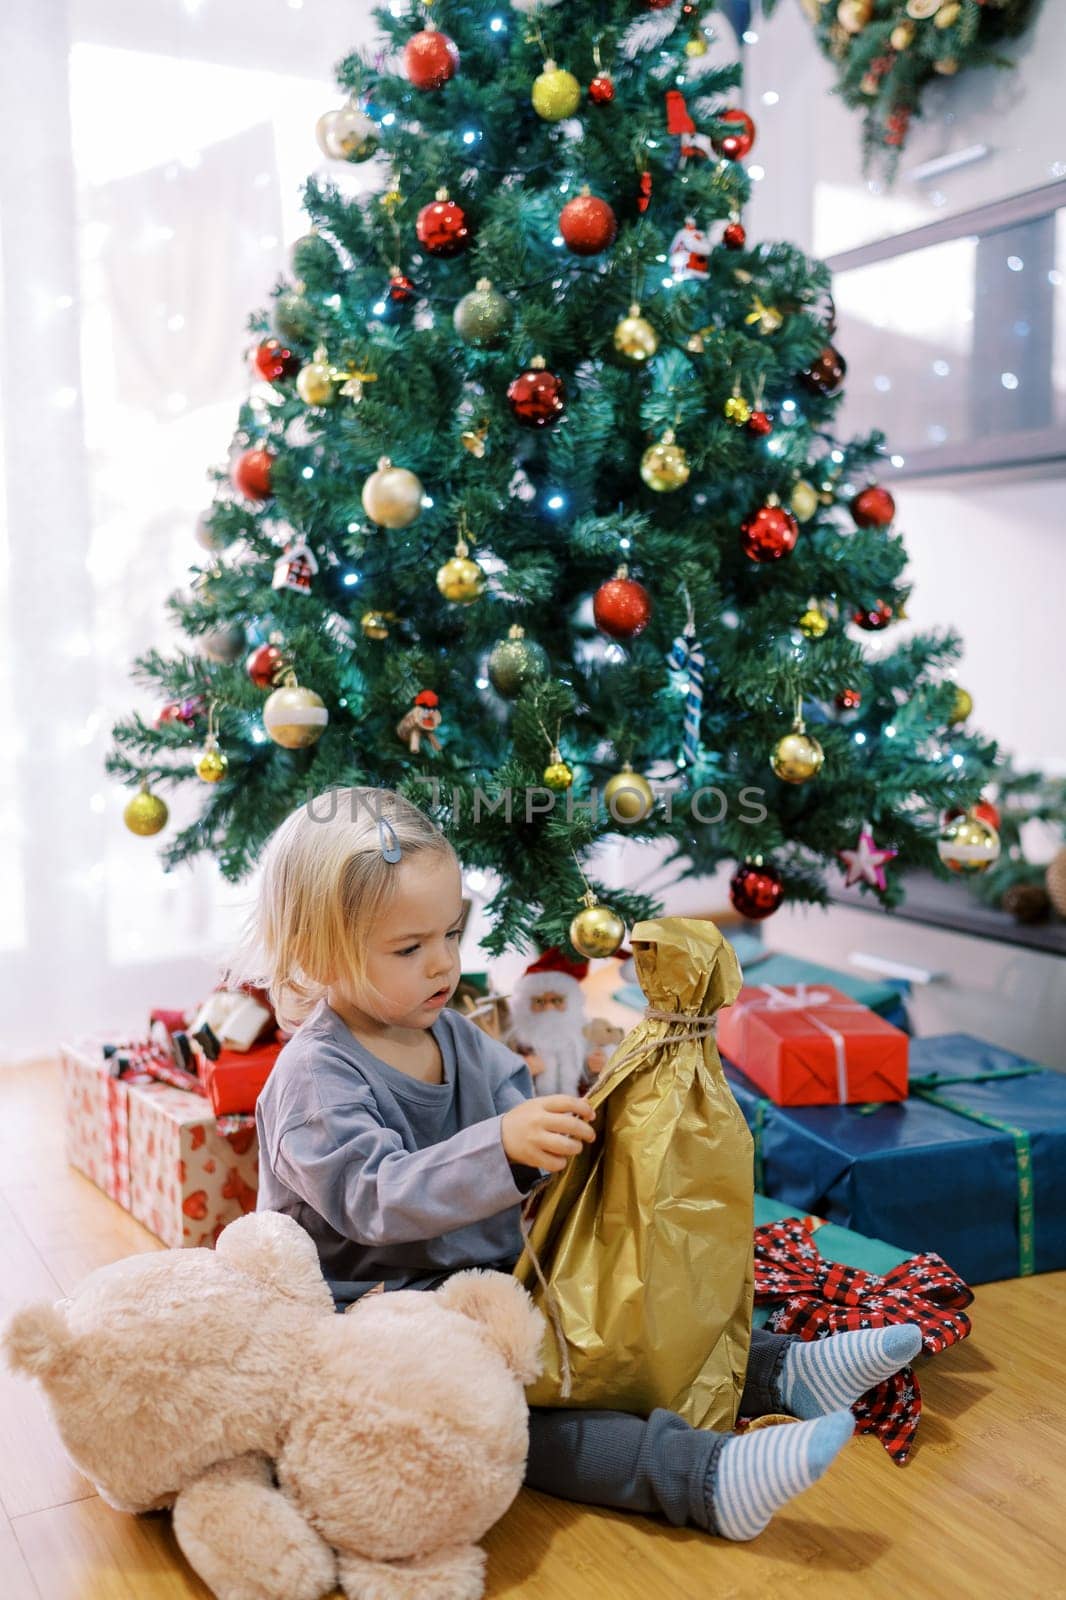 Little girl sits on the floor near the Christmas tree and unpacks a gift by Nadtochiy